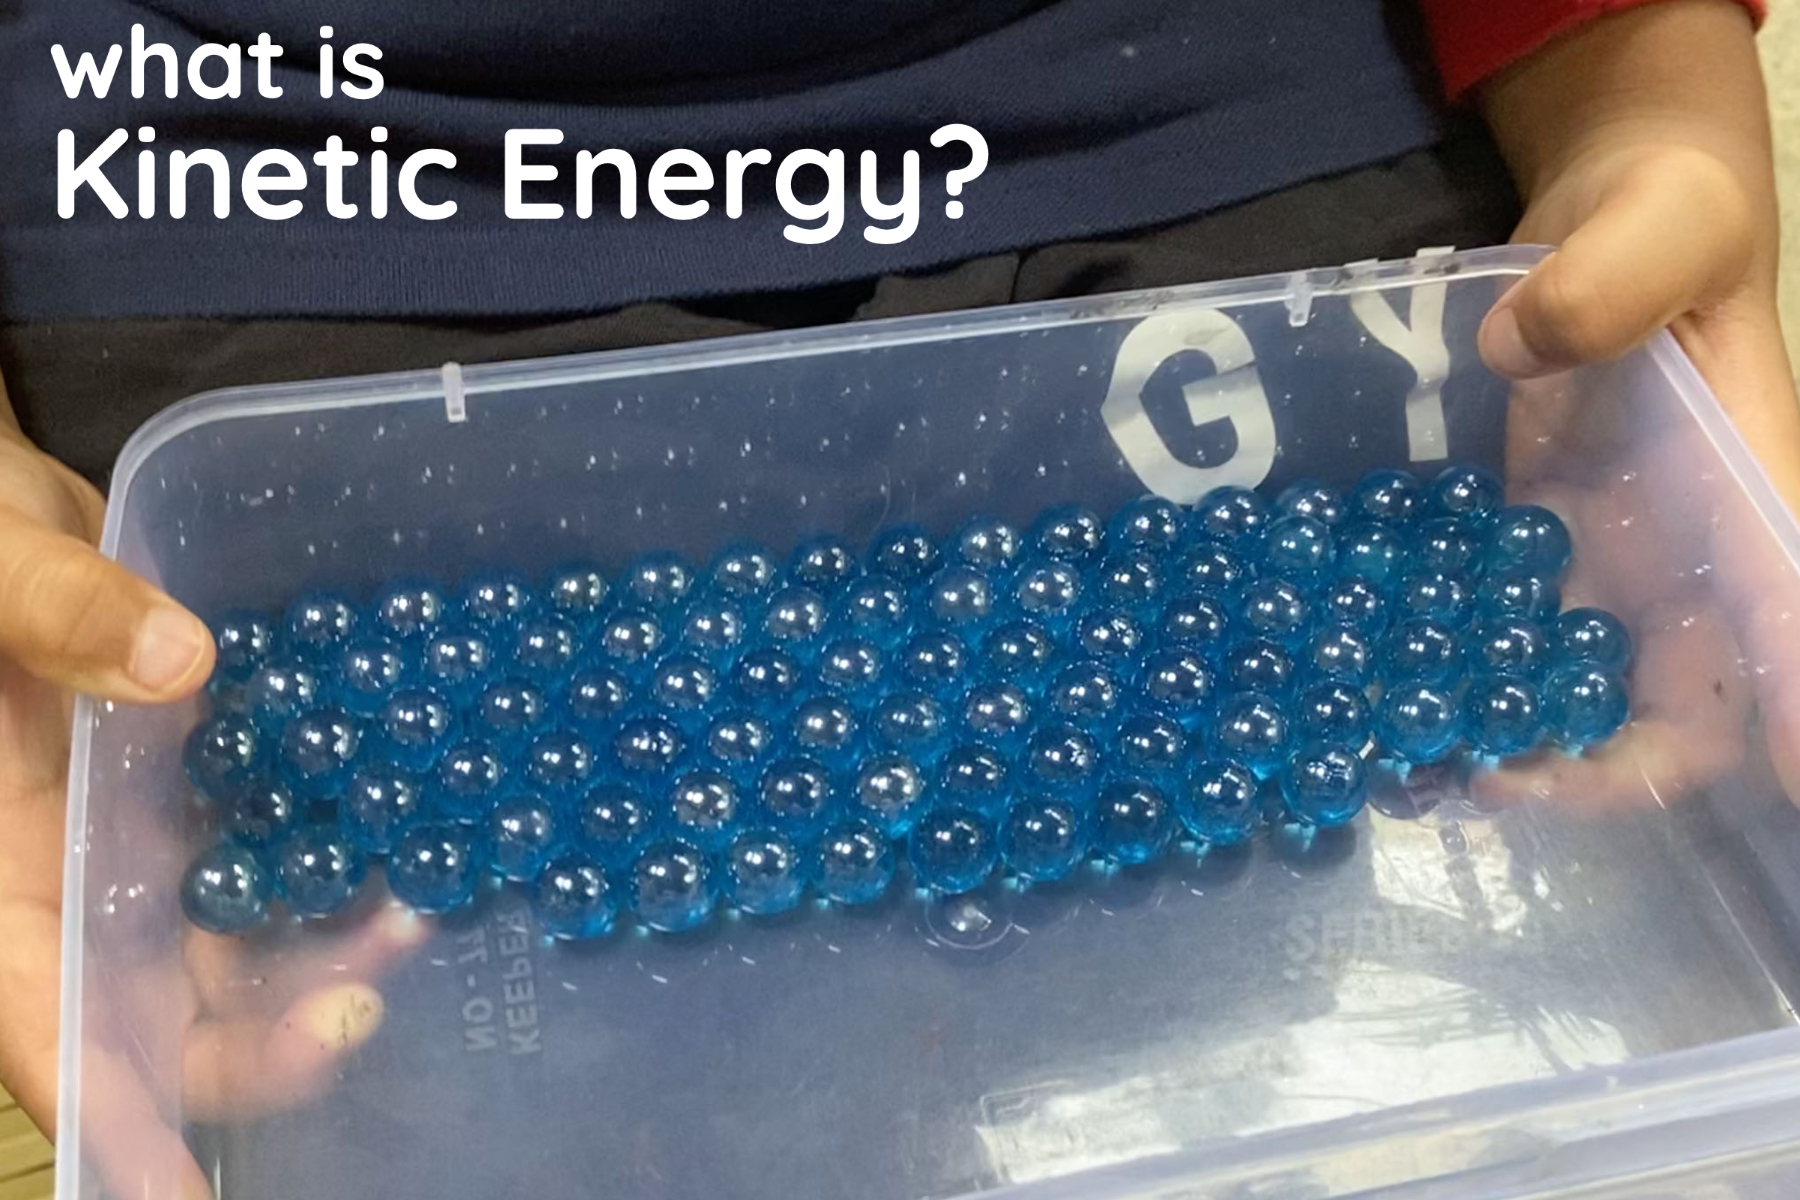 image from Explore kinetic energy of solid, liquid and gas